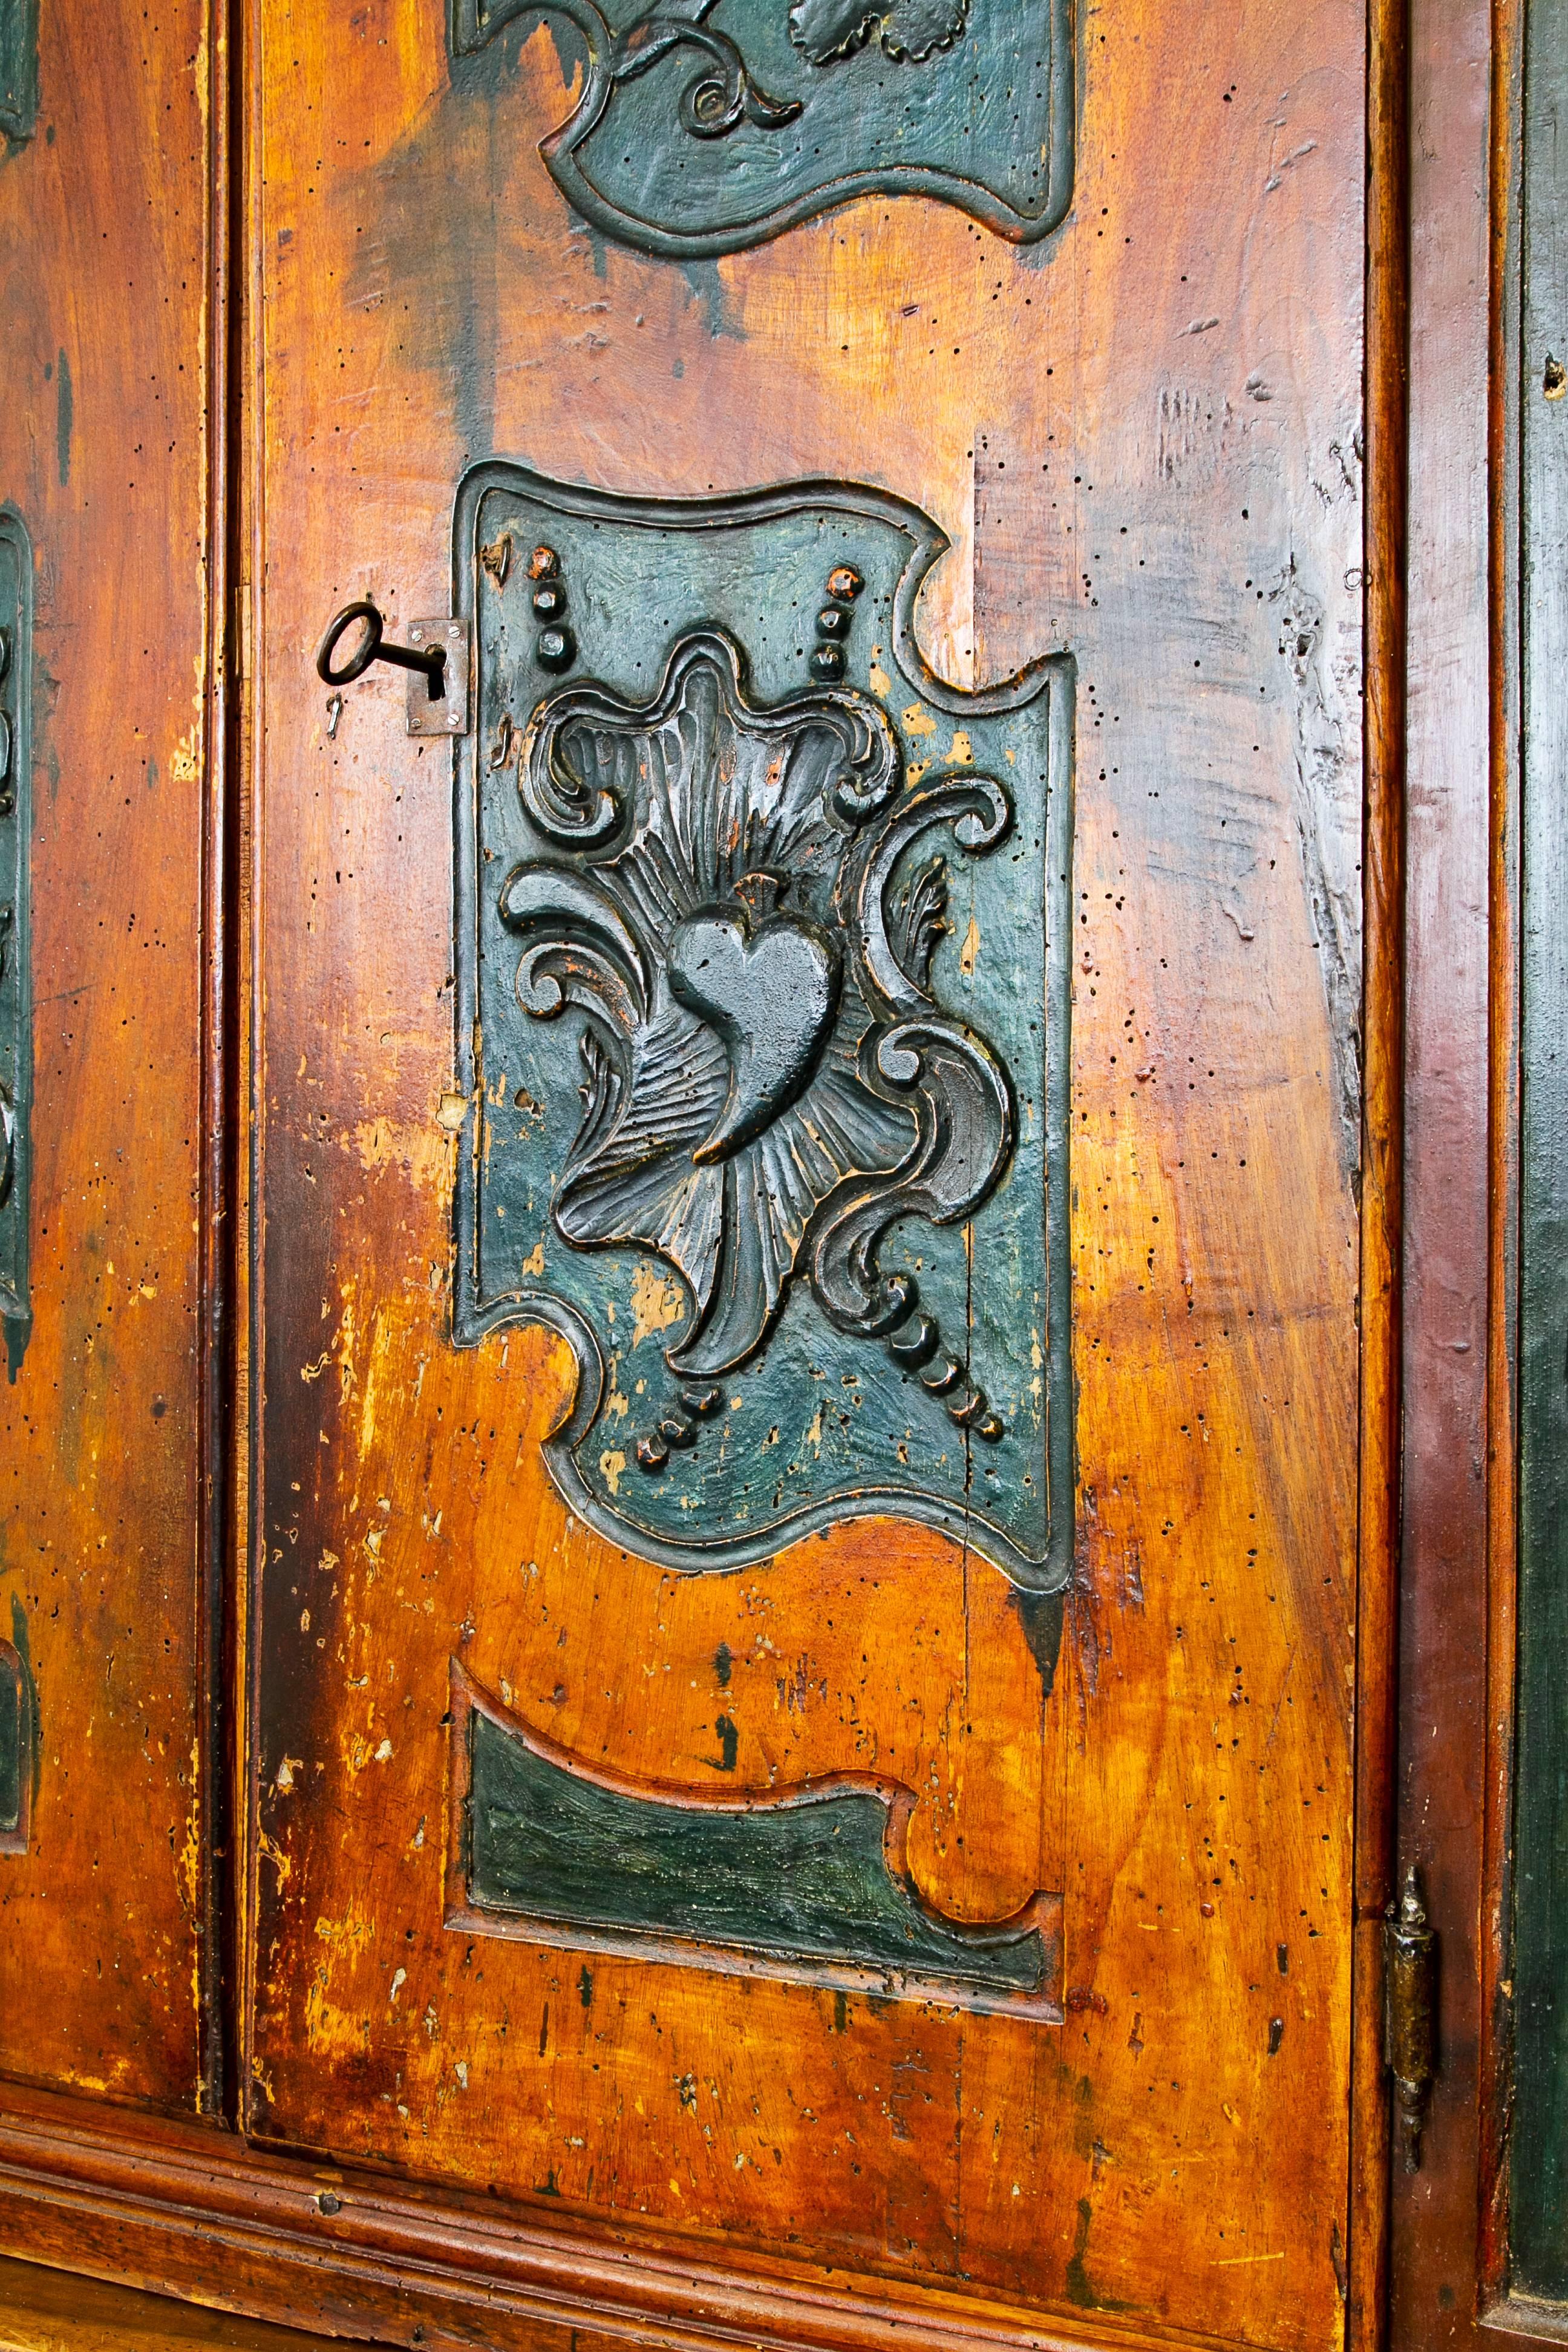 Pair of 18th century, Spanish cabinets in their original polychromy. From the region of Aragon. Both of them have the family shields carved onto the doors.
 